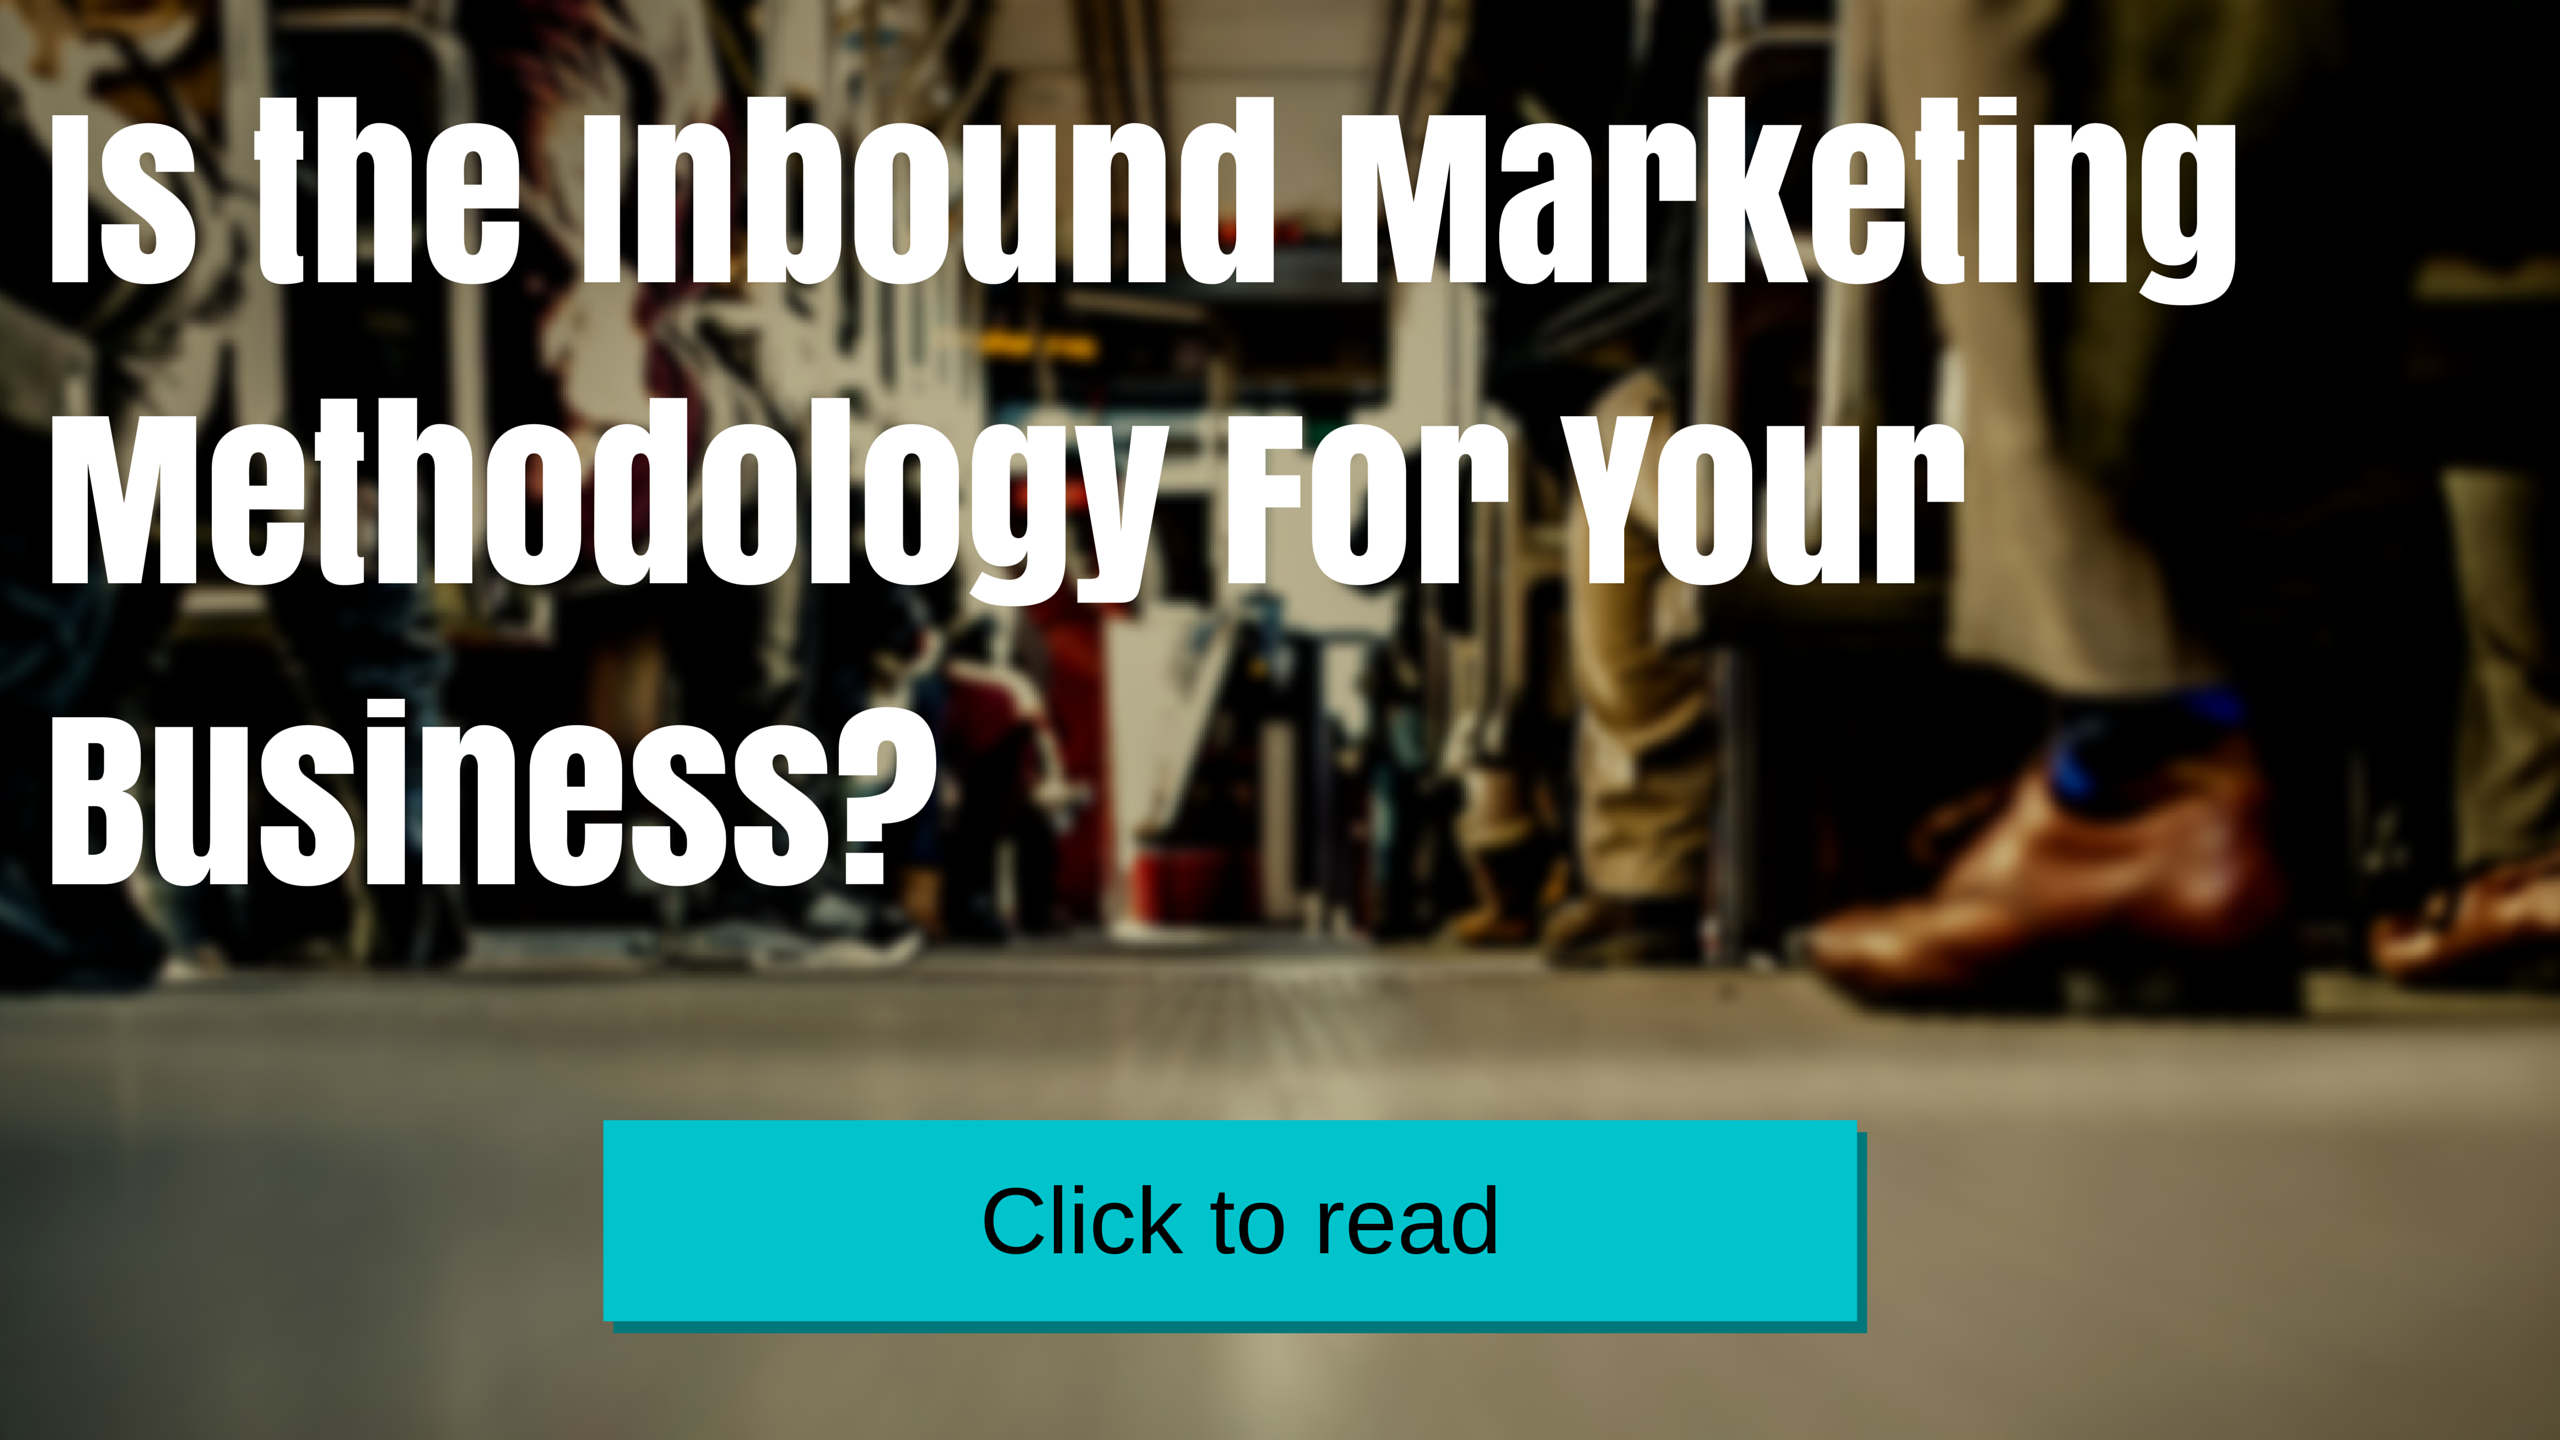 Is the Inbound Marketing Methodology For Your Business